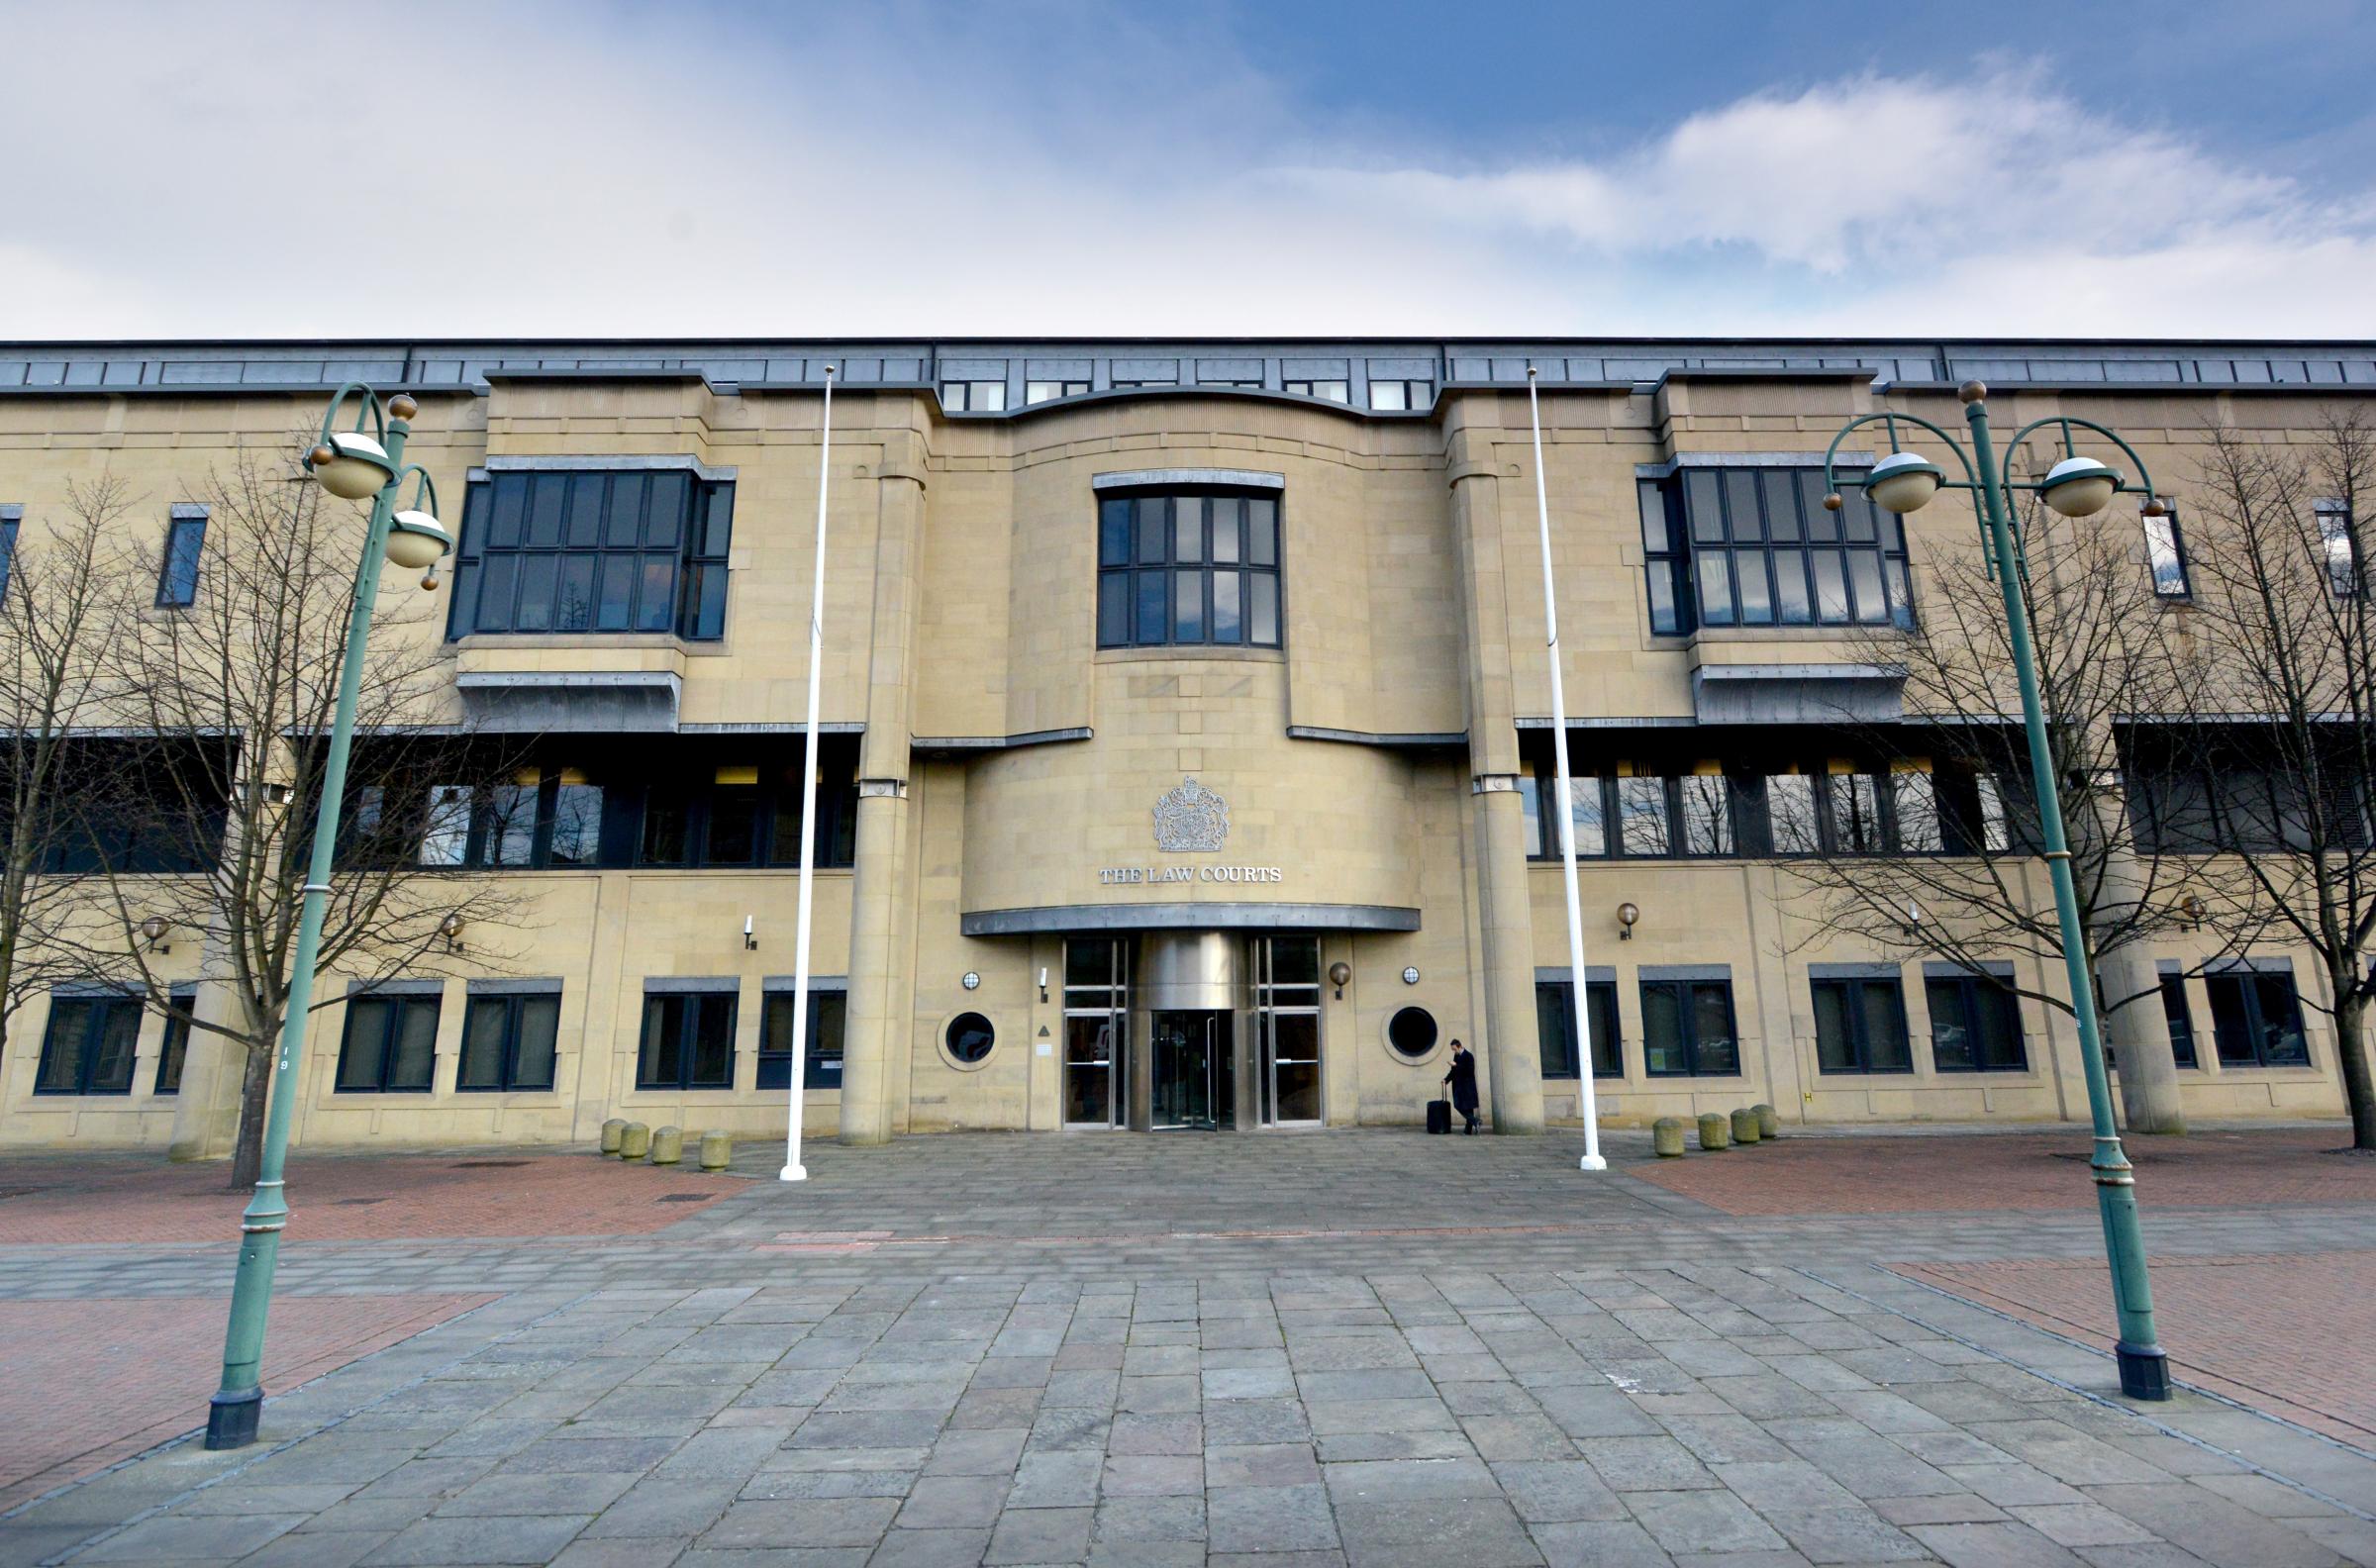 Burglar jailed after being caught red-handed at Bradford house - Bradford Telegraph and Argus